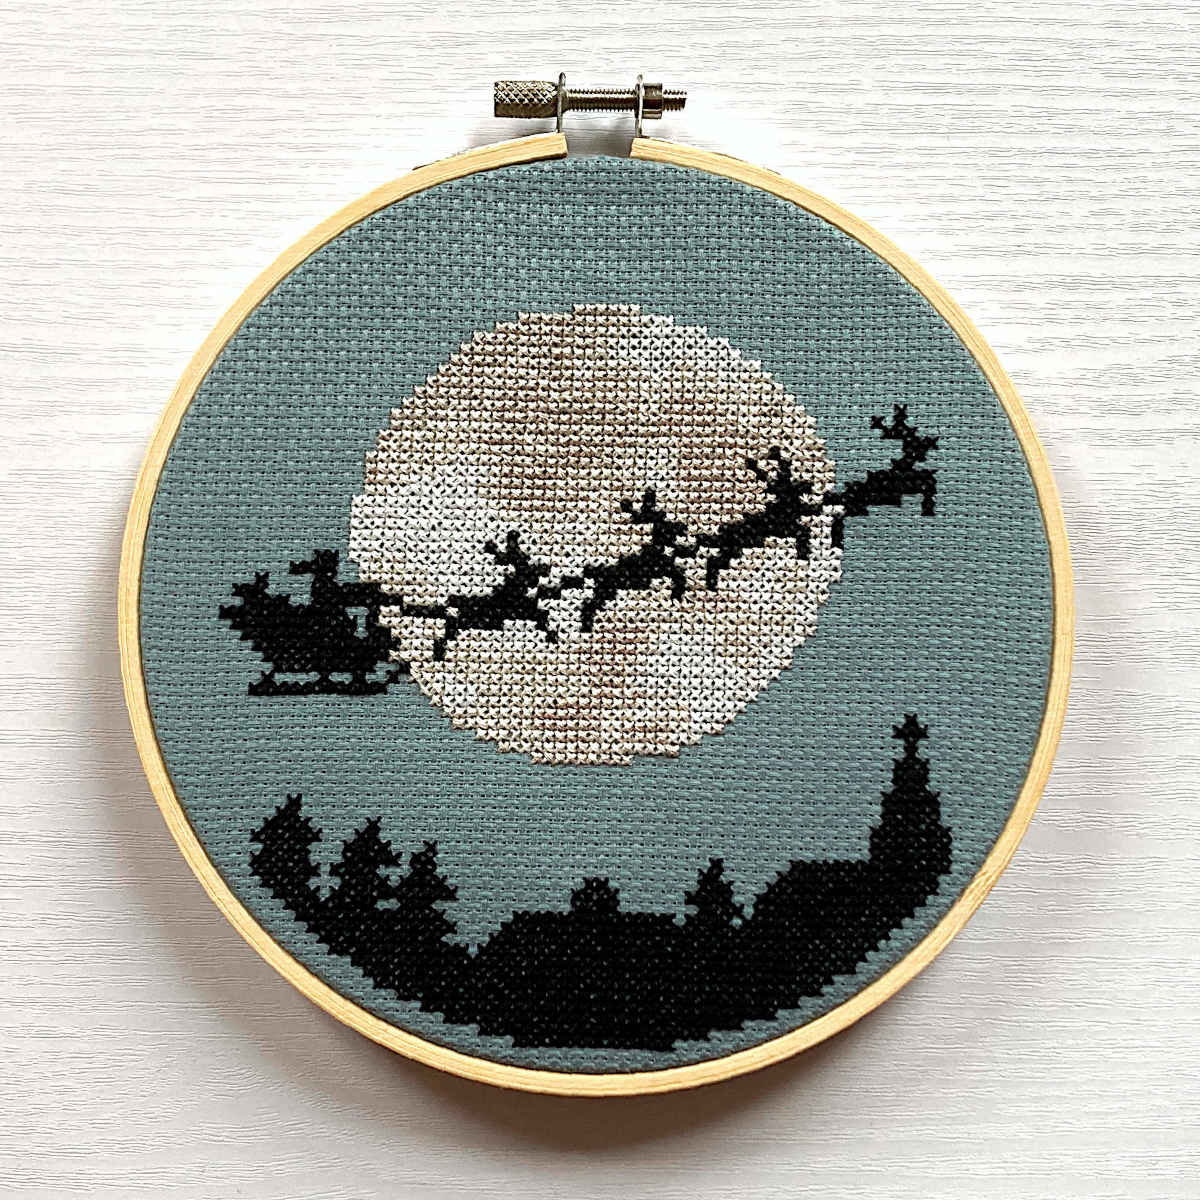 Cross stitch of santa in his sleigh pulled by reindeer silhouetted against the moon